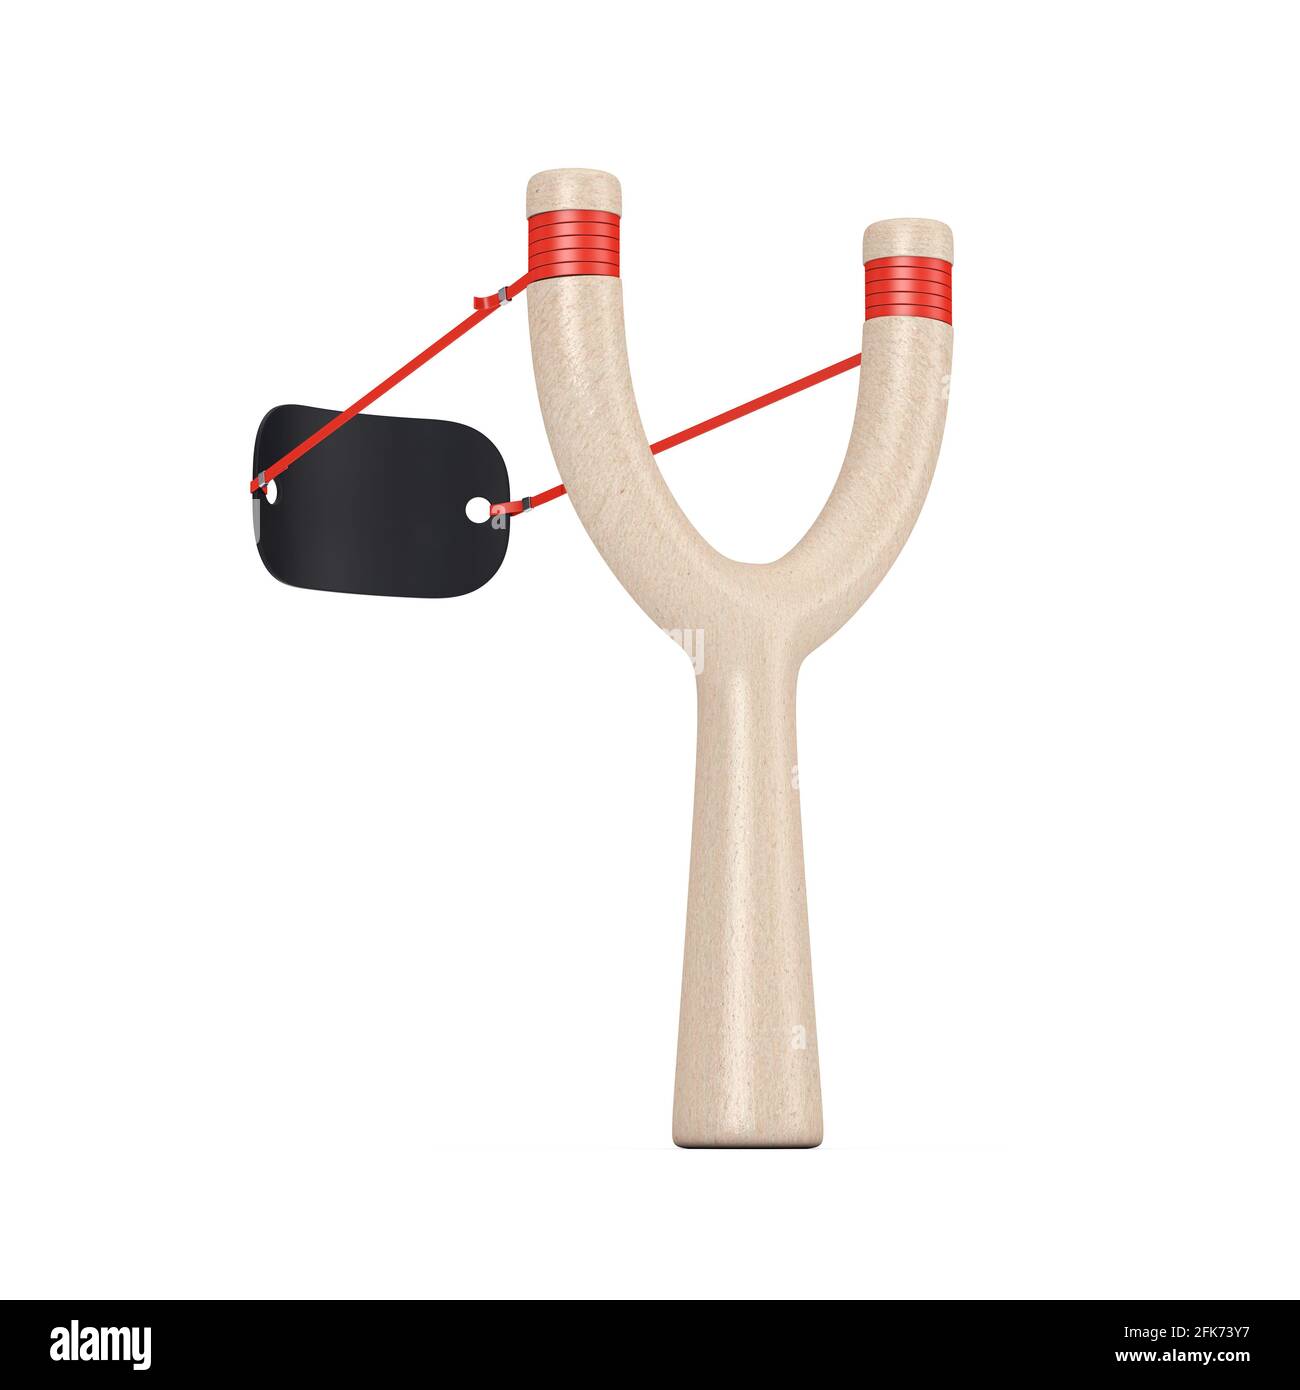 Danger Wooden Slingshot Toy Weapon on a white background. 3d Rendering Stock Photo